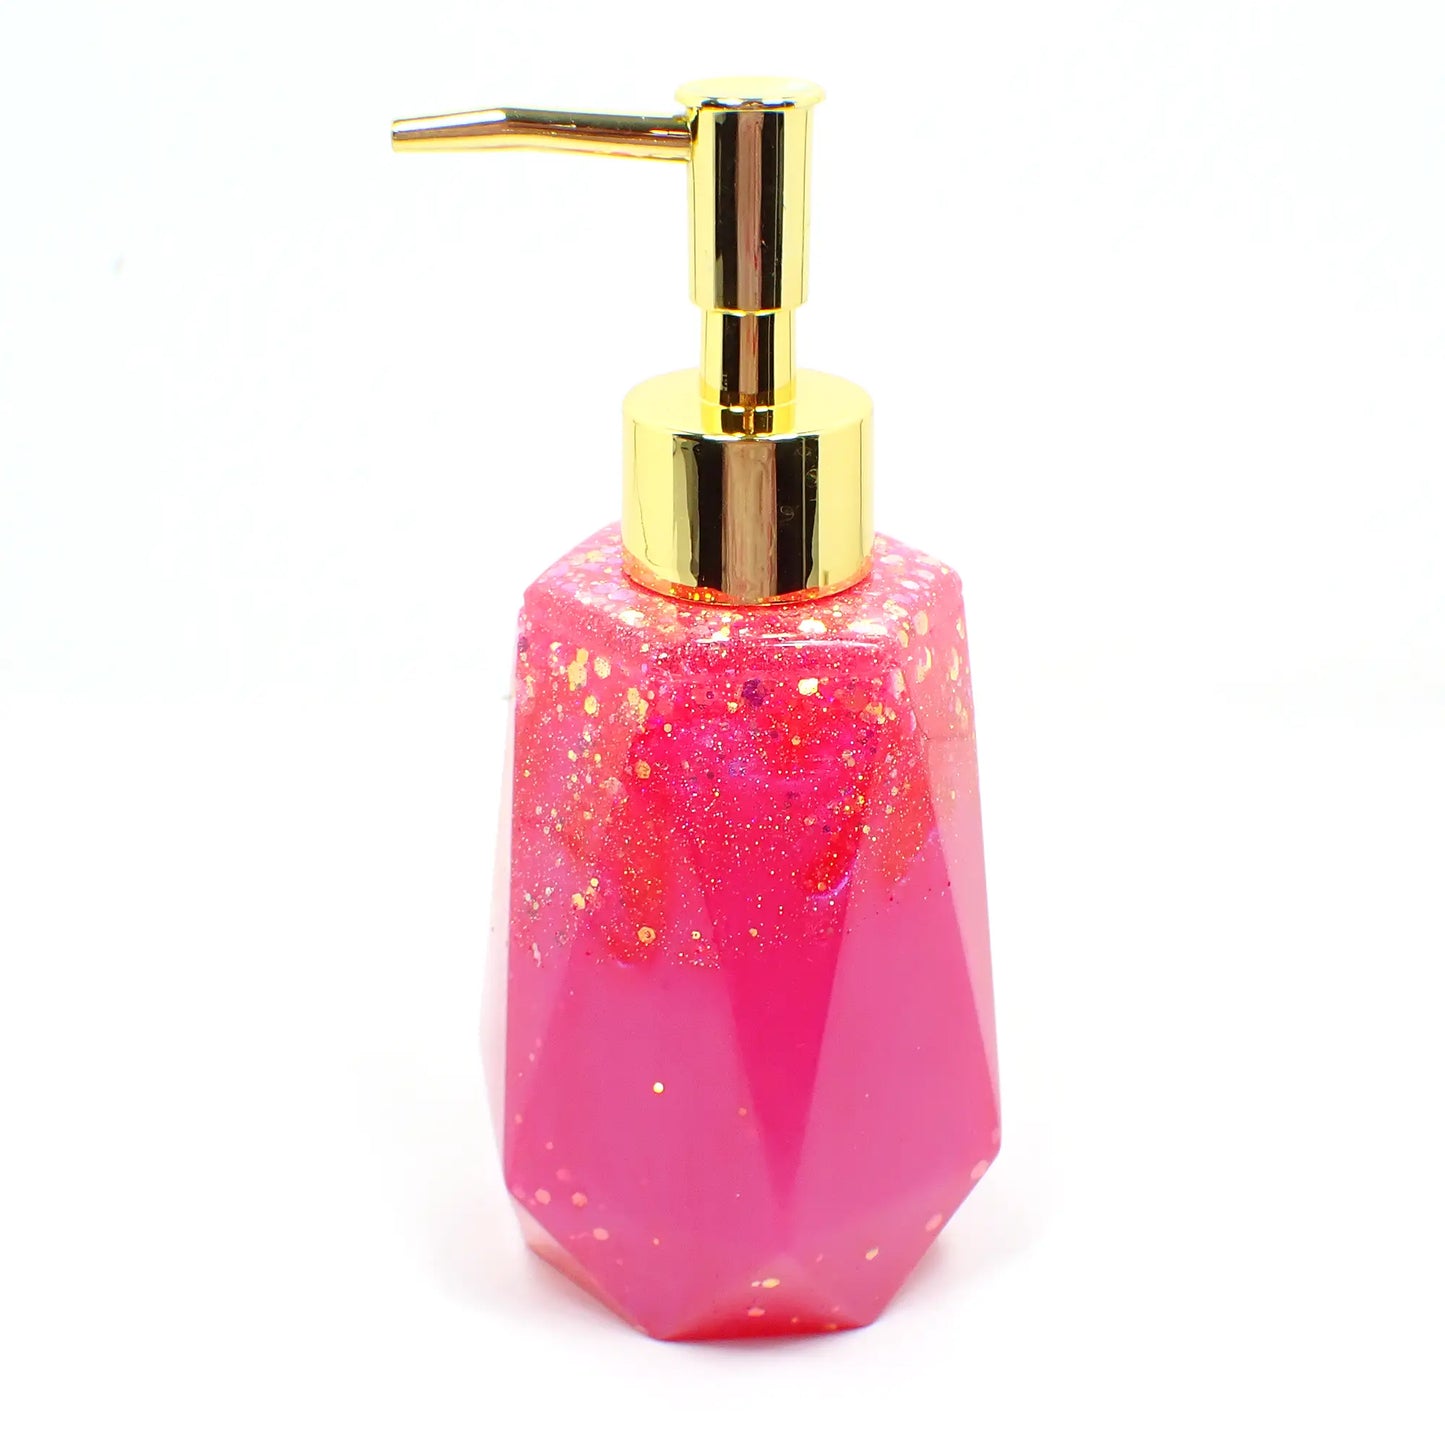 Faceted Handmade Bright Pearly Pink Resin and Glitter Soap Dispenser, Lotion Dispenser